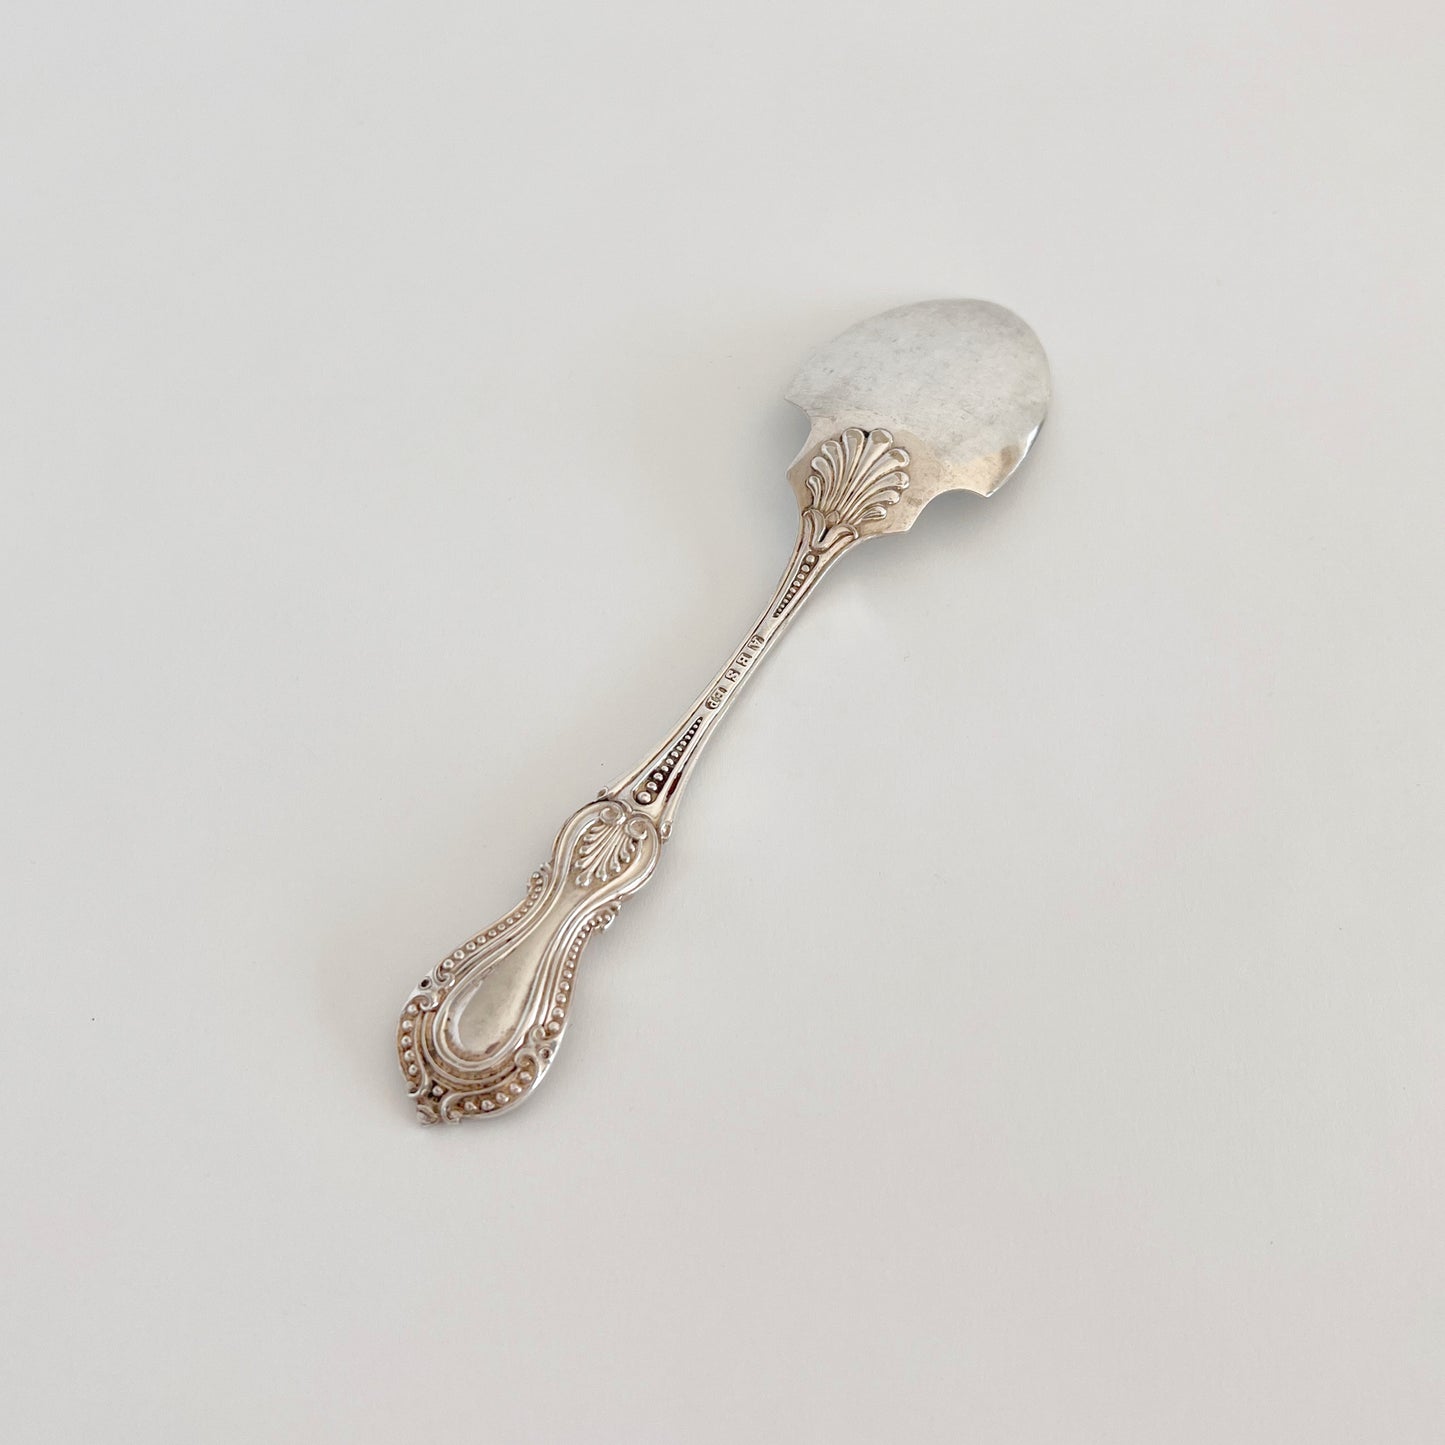 English antique silver-plated jam spoon